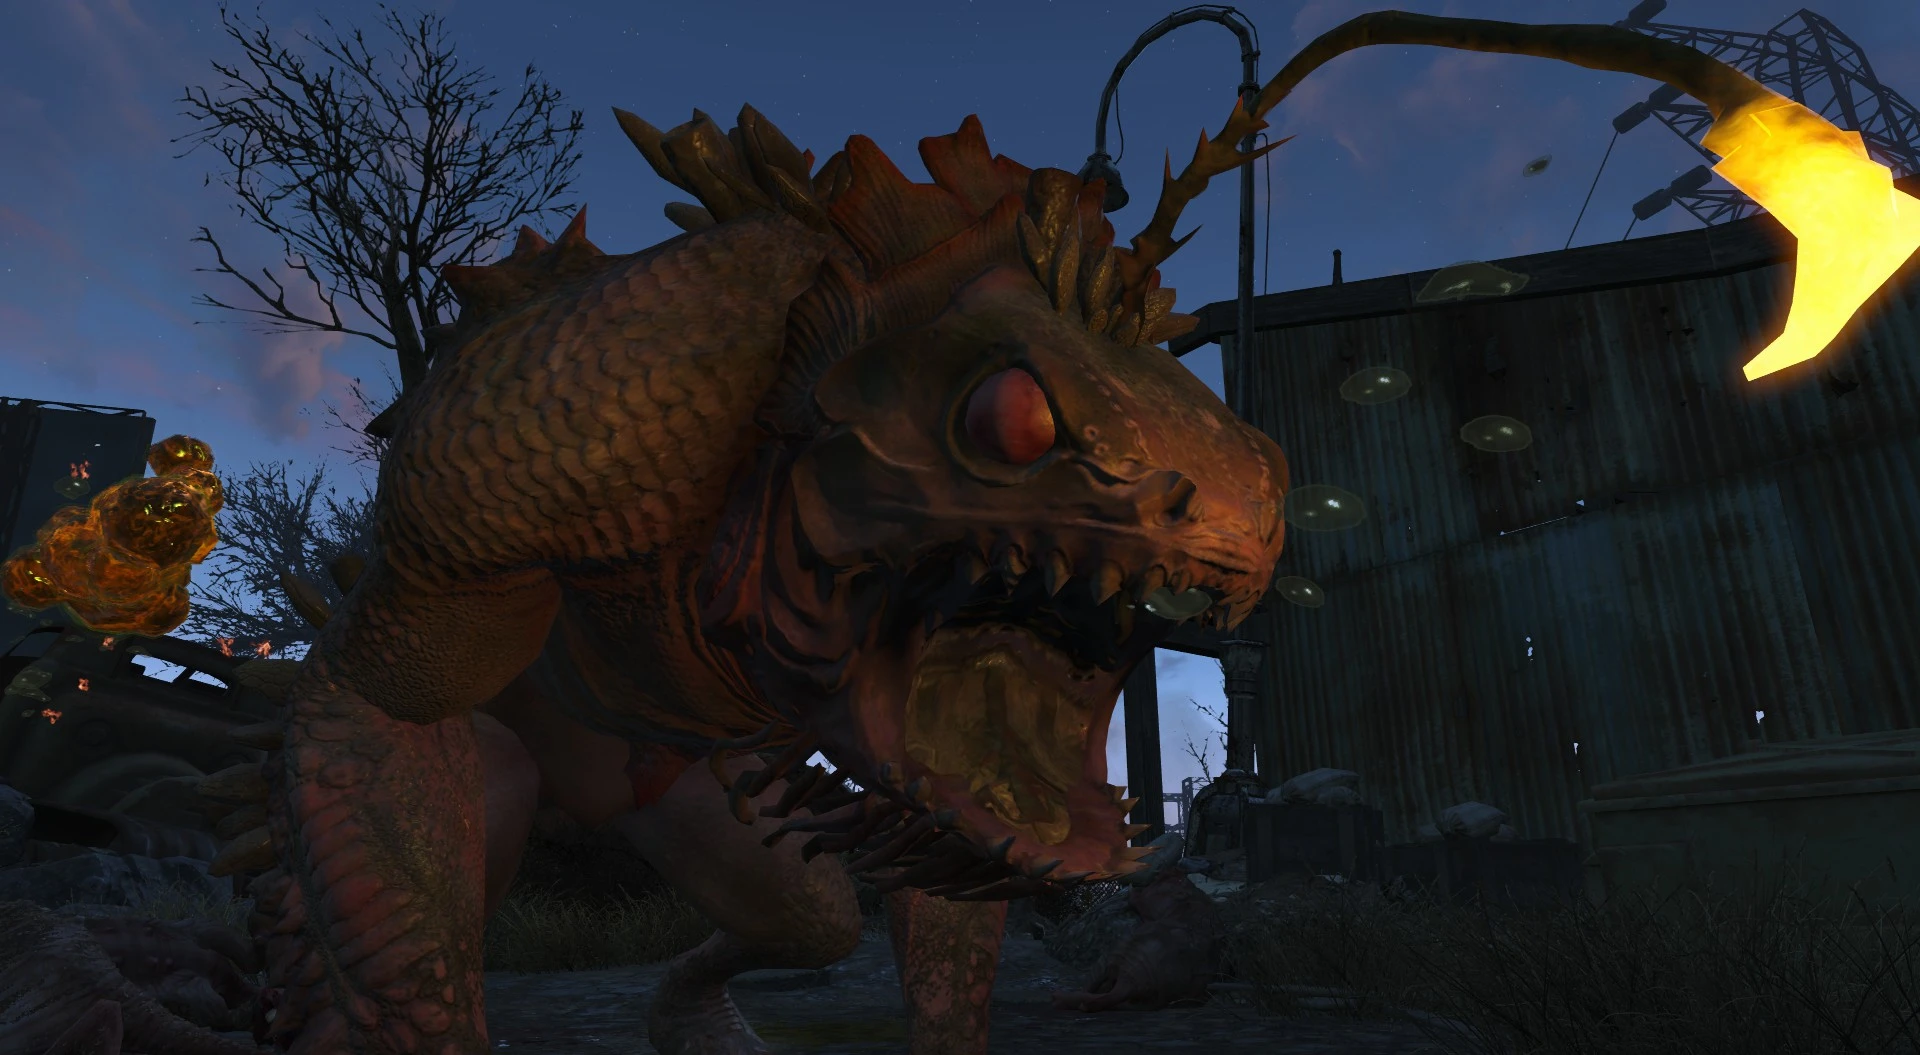 Some Unfinished Mods-Playable Creatures at Fallout 4 Nexus - Mods and